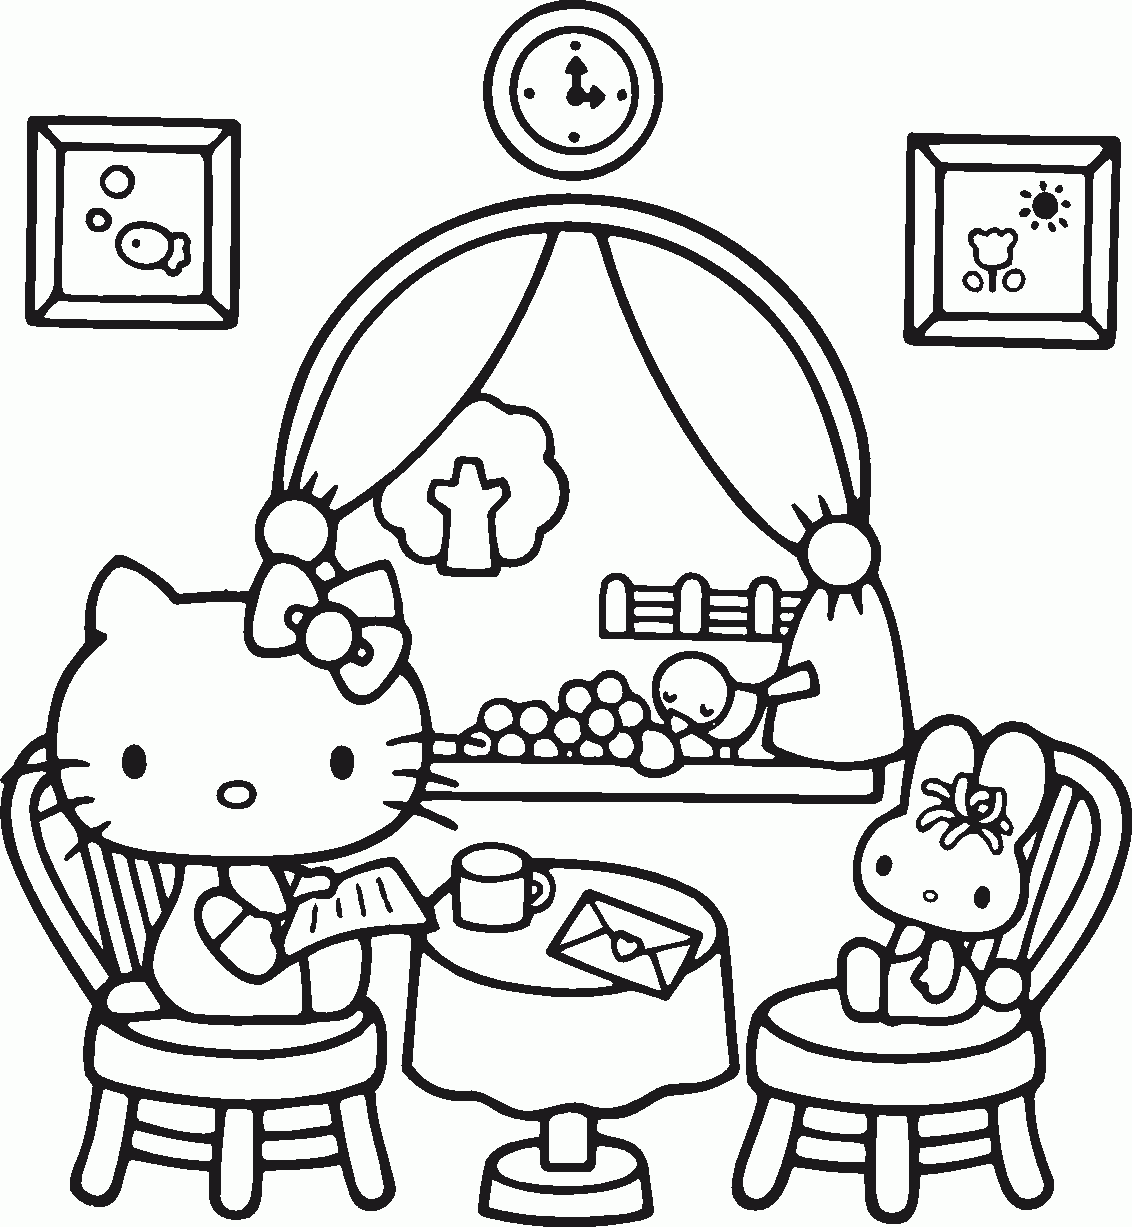  Hello Kitty Sitting Coloring Pages